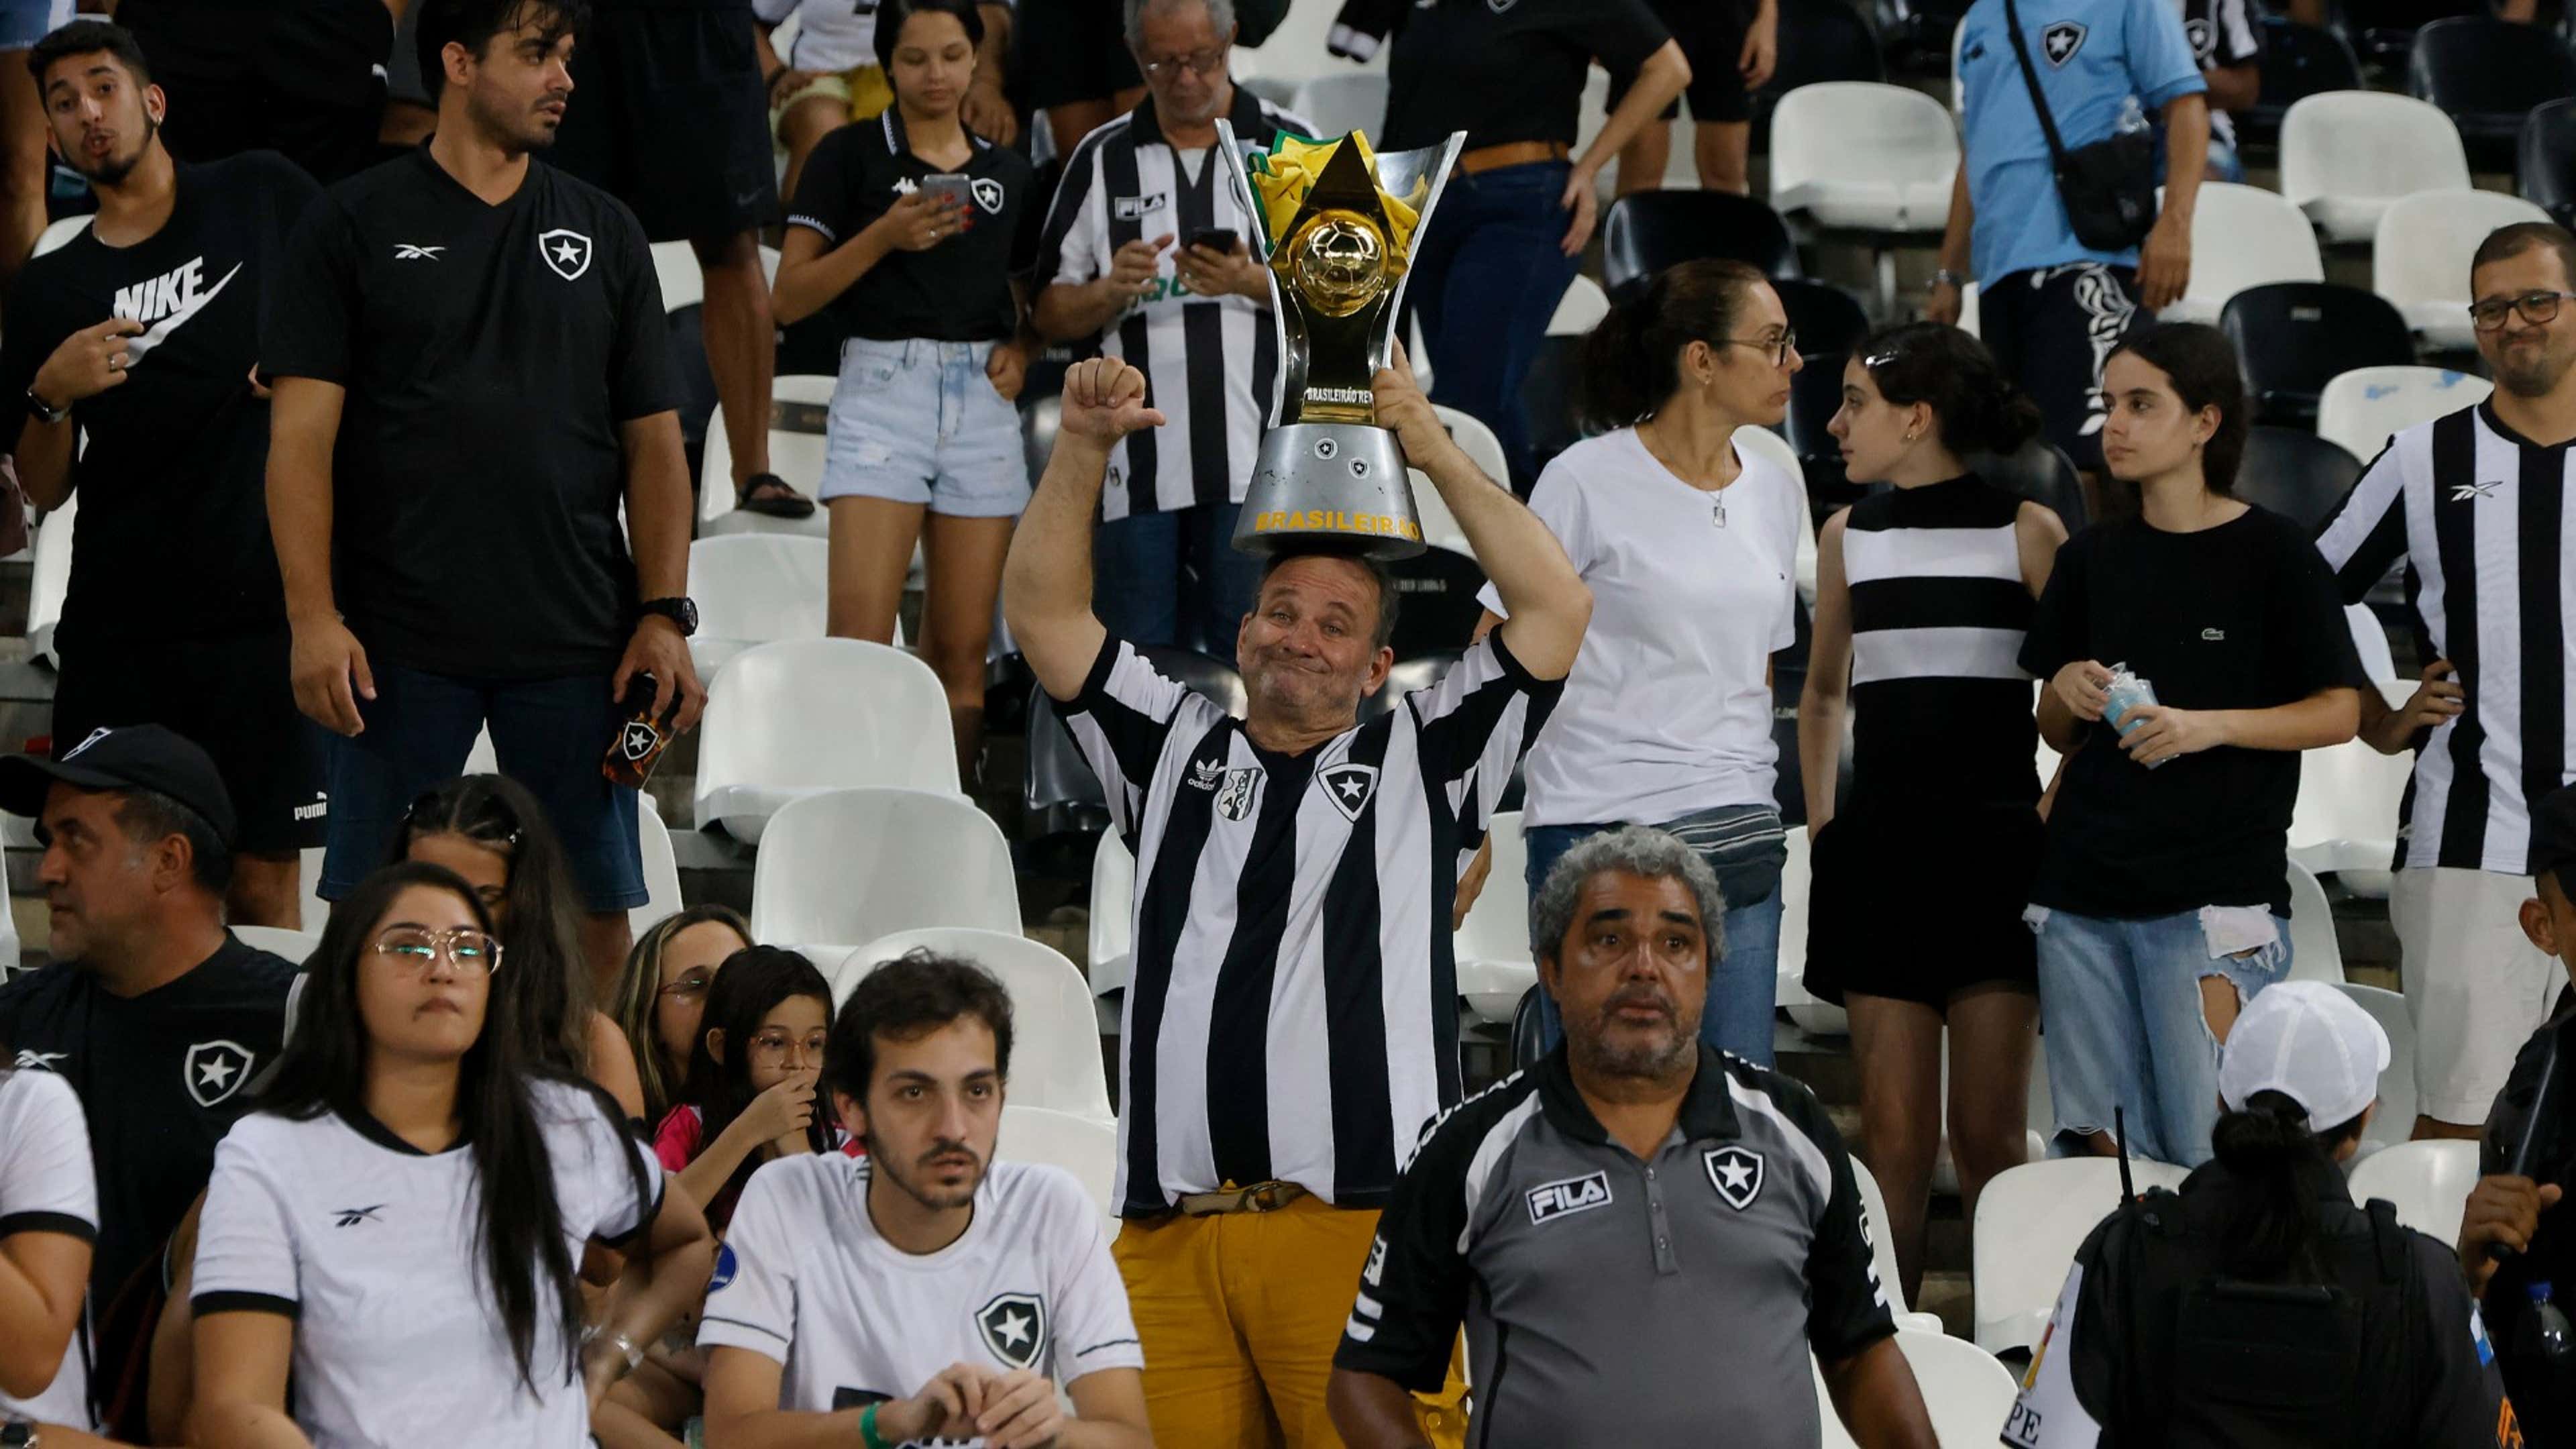 Corinthians crowned Brasileirao champions for fourth consecutive